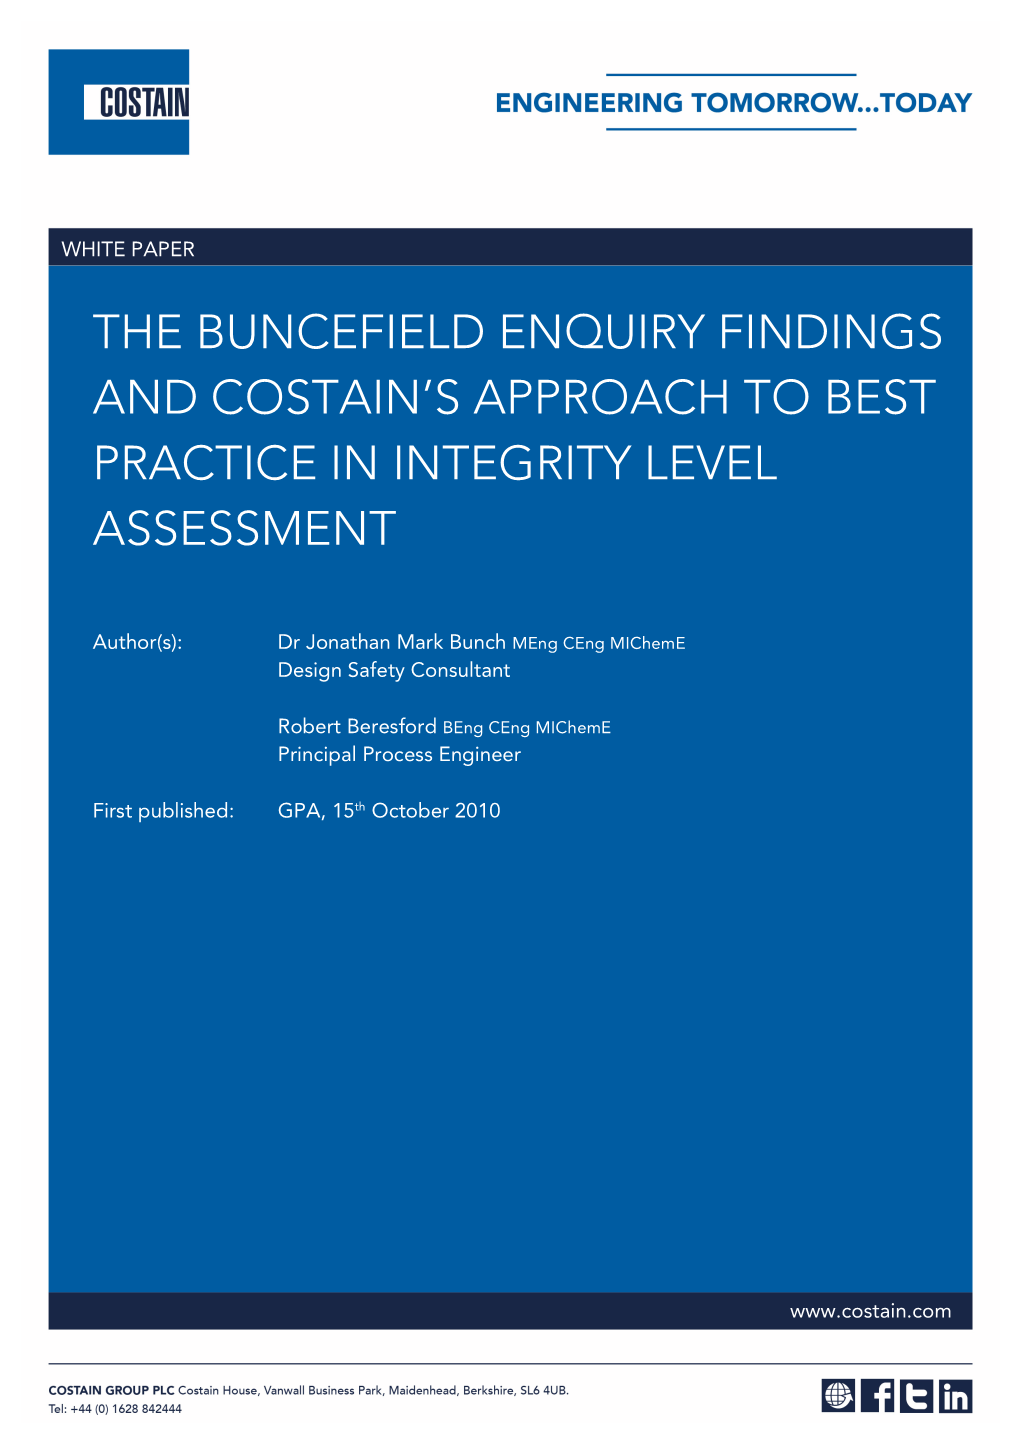 The Buncefield Enquiry Findings and Costain's